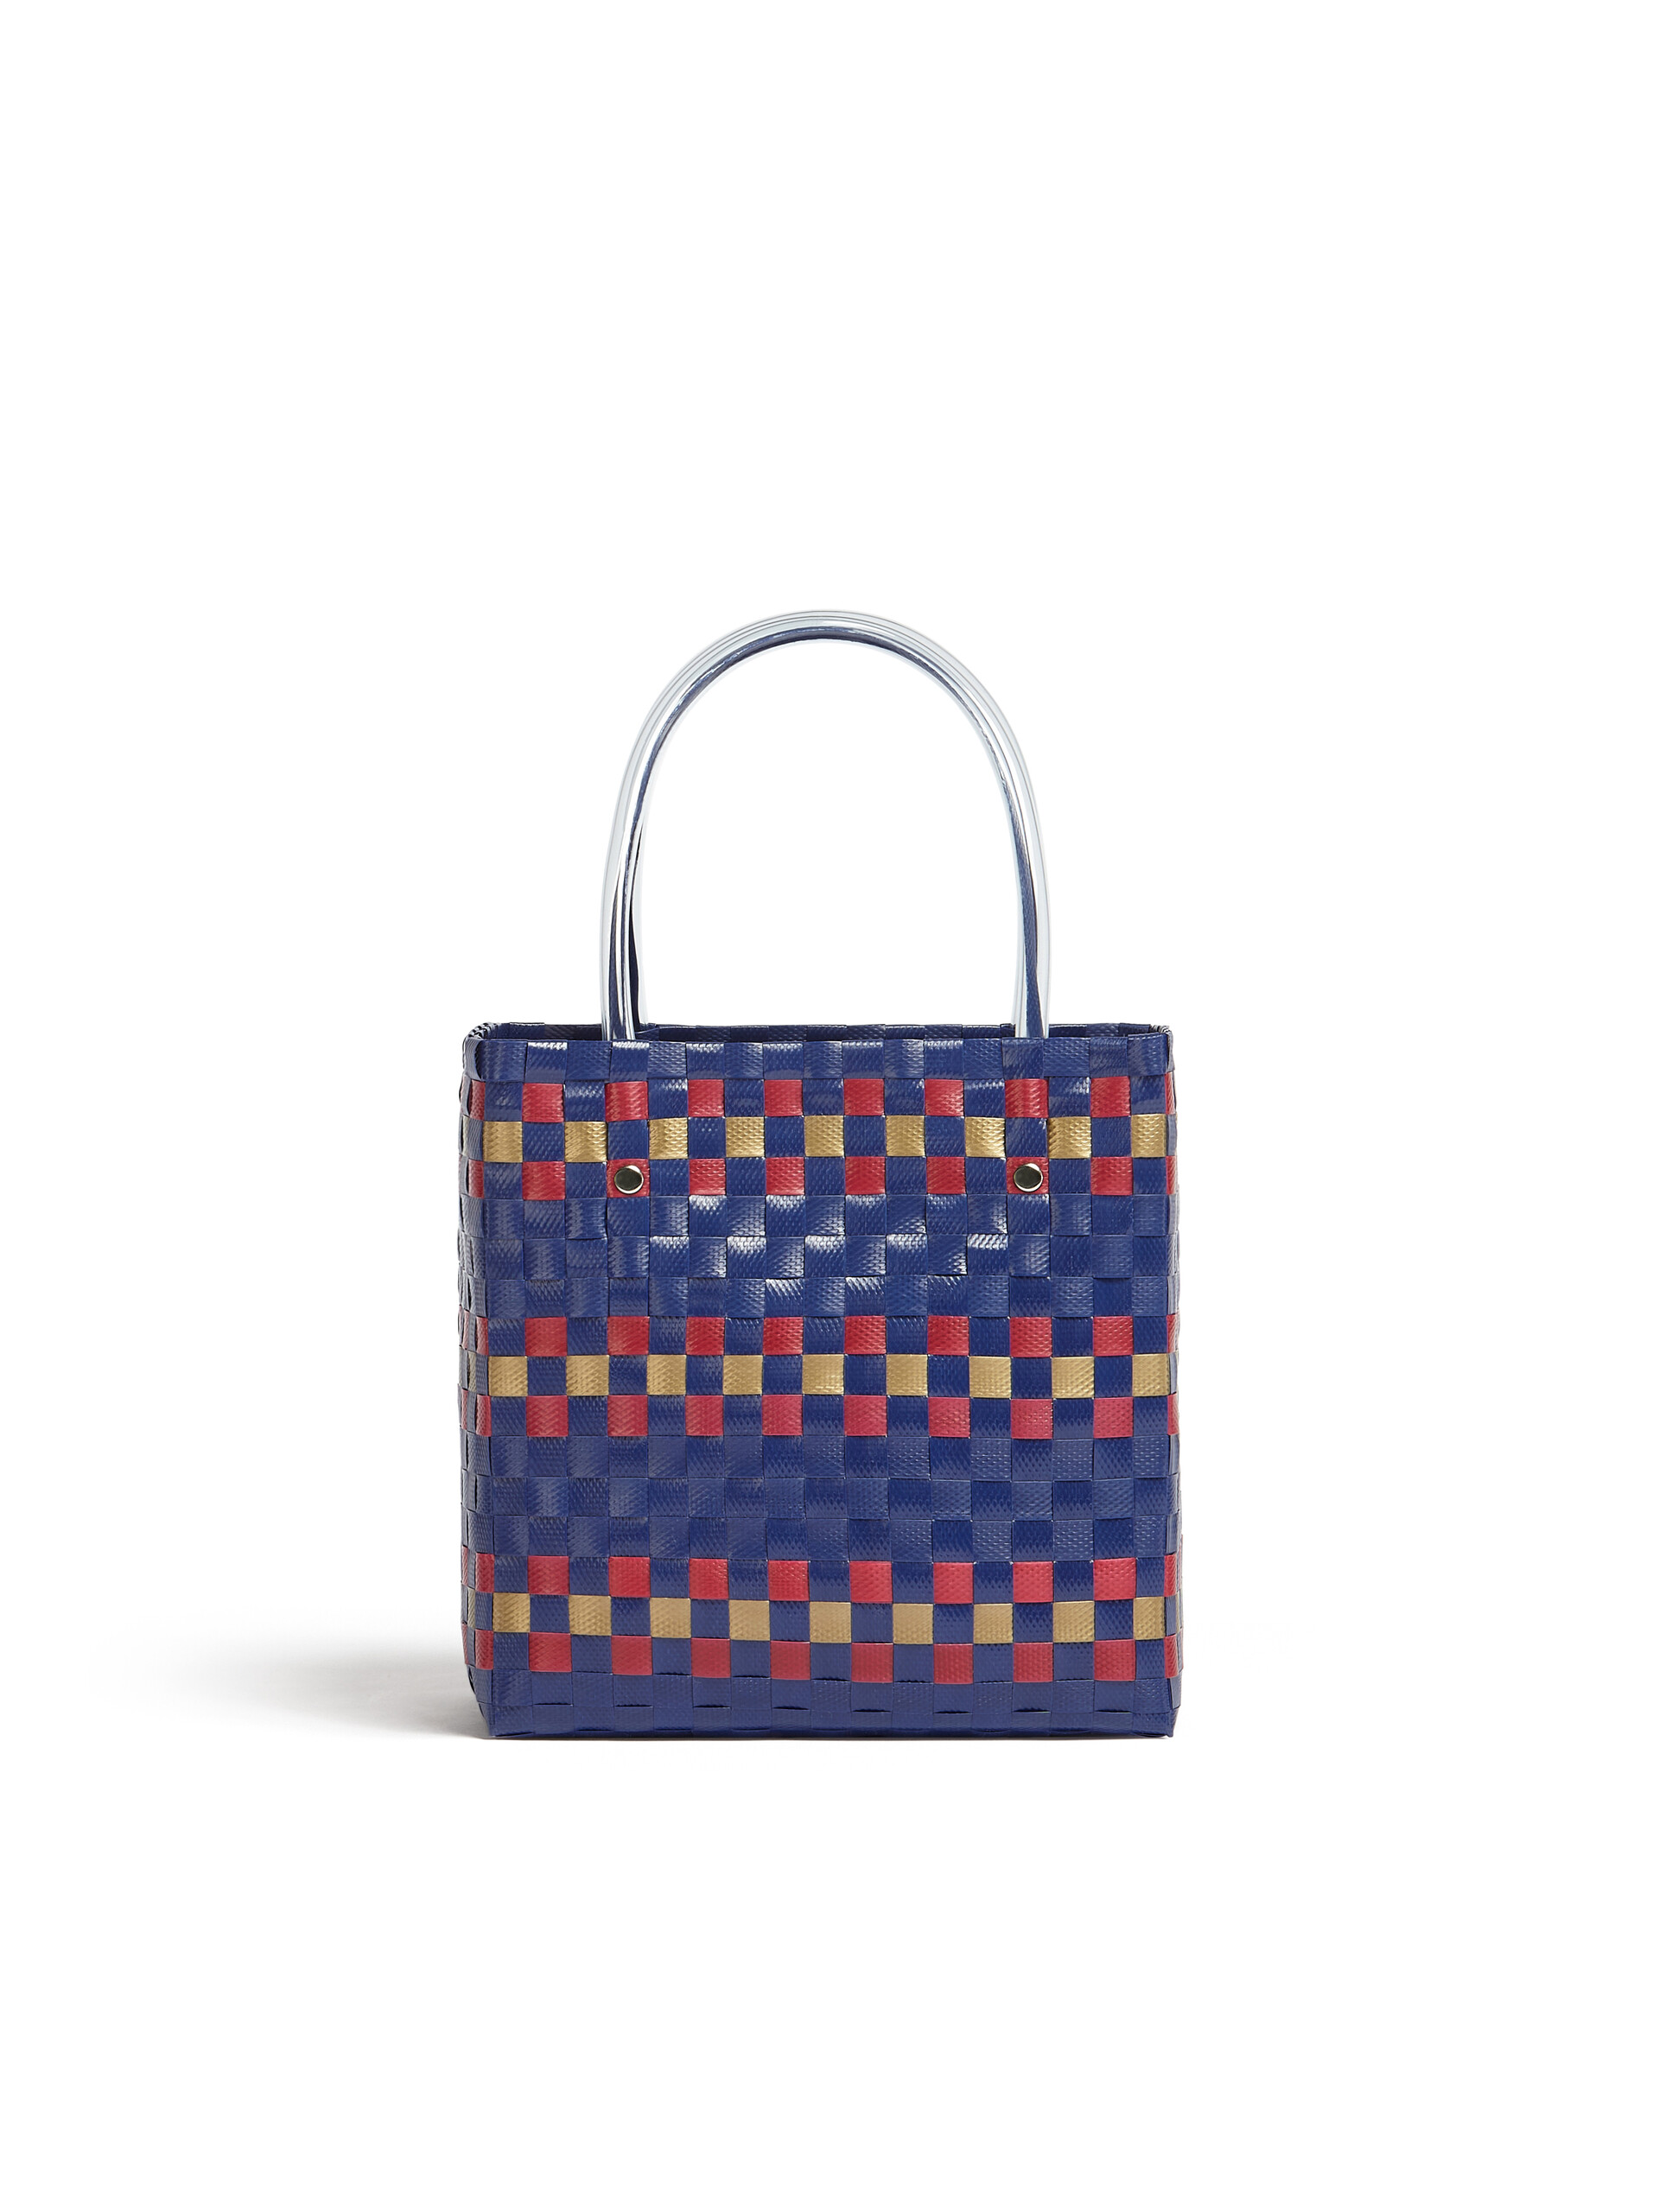 MARNI MARKET BASKET bag in blue woven material - Shopping Bags - Image 3